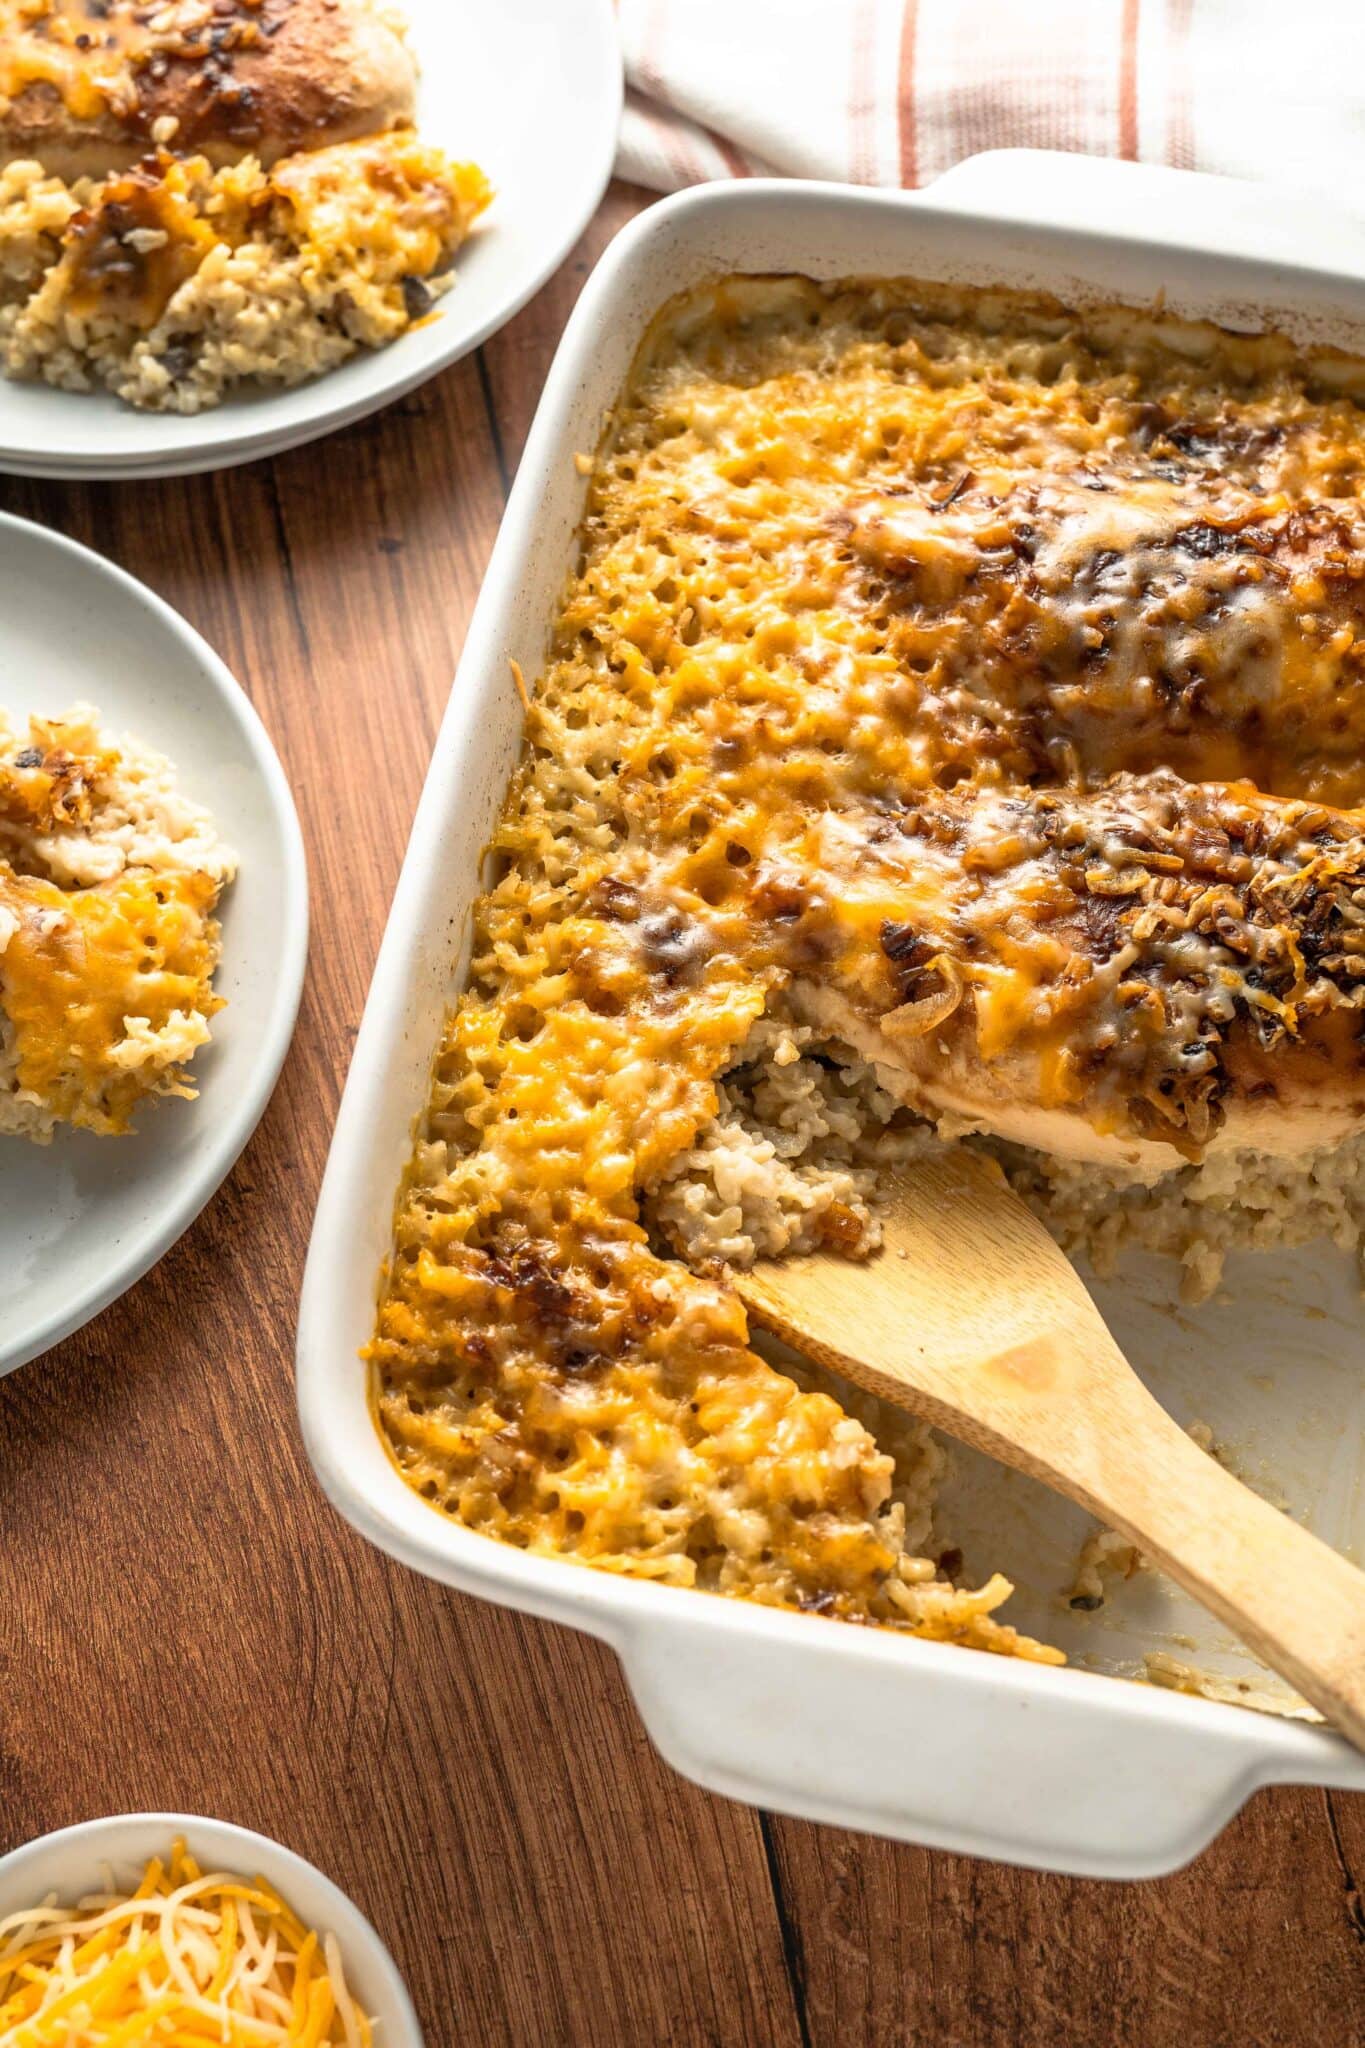 A creamy casserole dish perfect for busy families, featuring a golden-brown cheese topping, partially scooped onto white plates, with a wooden serving spoon inside the casserole dish.